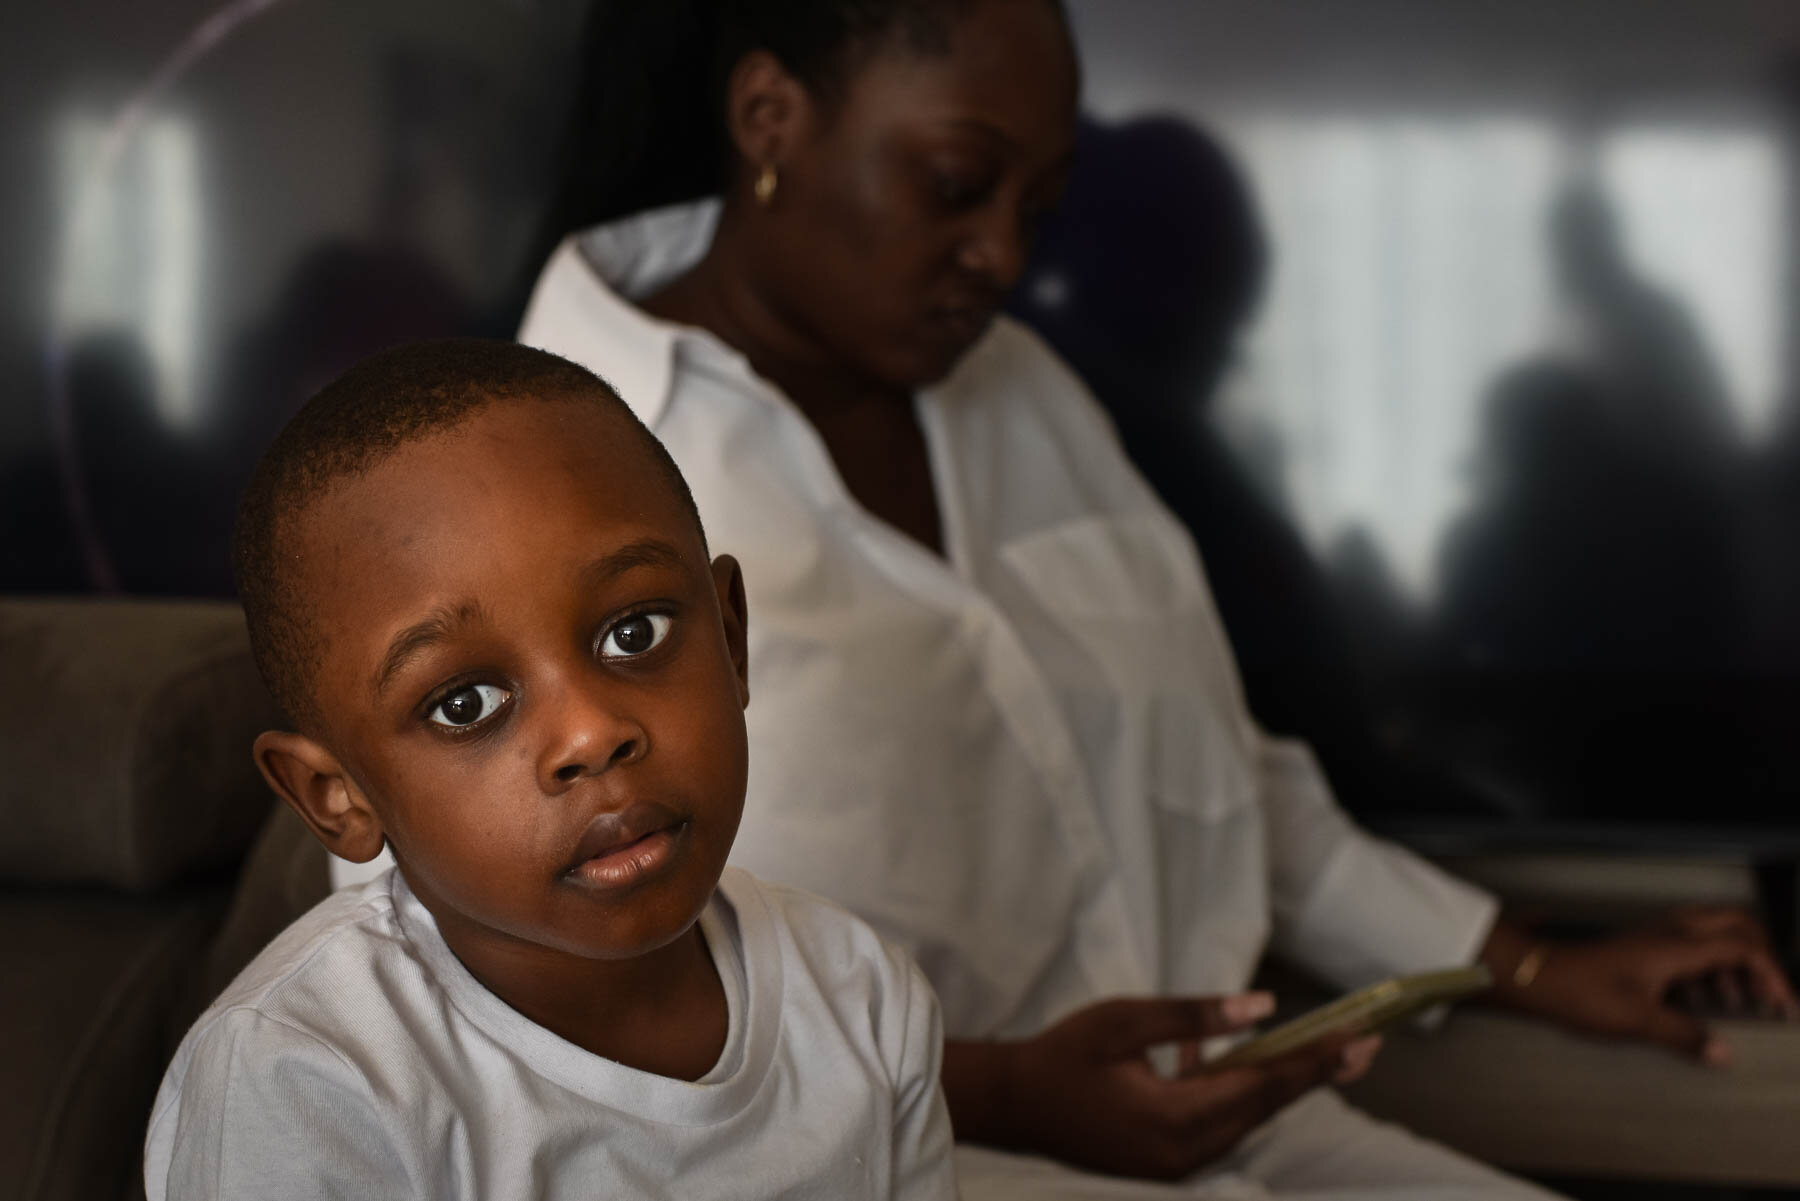  I was photographing a family party. I think this young boy was bored by the adult conversation. I love the openness of his gaze. 